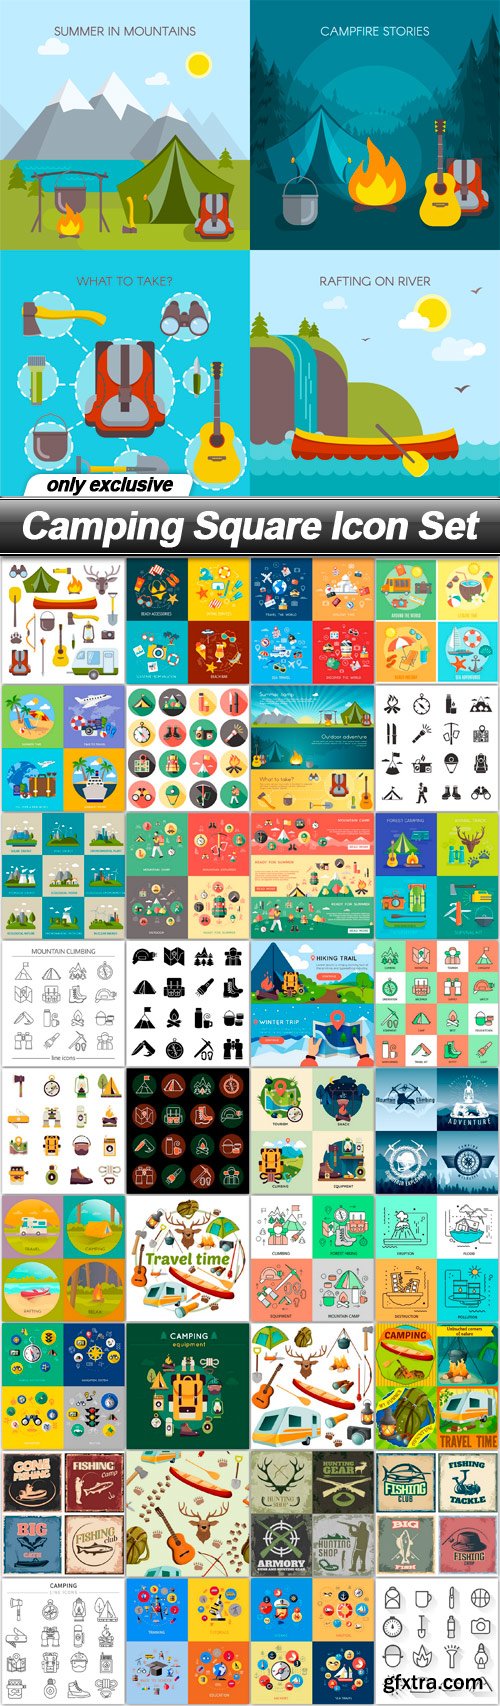 Camping Square Icon Set - 37 EPS